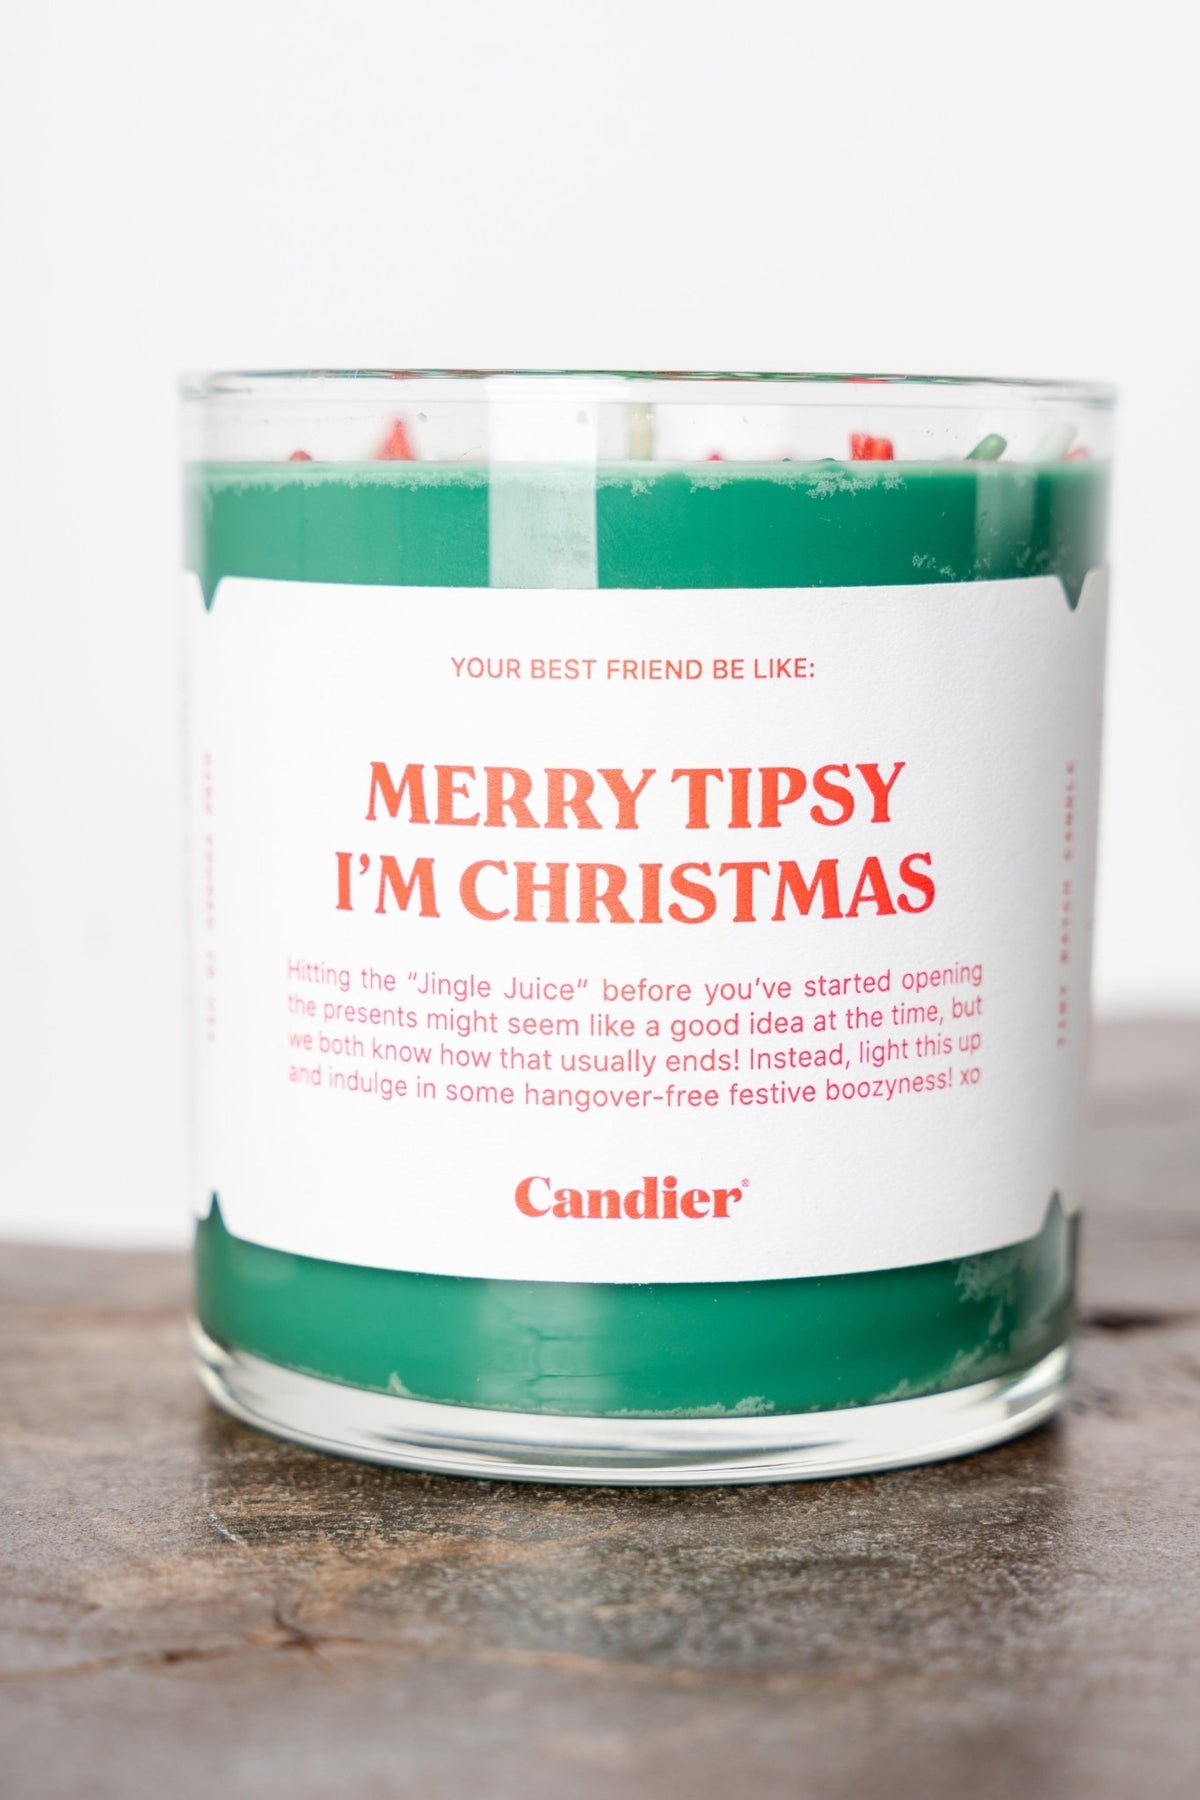 Merry tipsy, I'm Christmas Candier 9 oz candle - Trendy Holiday Apparel at Lush Fashion Lounge Boutique in Oklahoma City